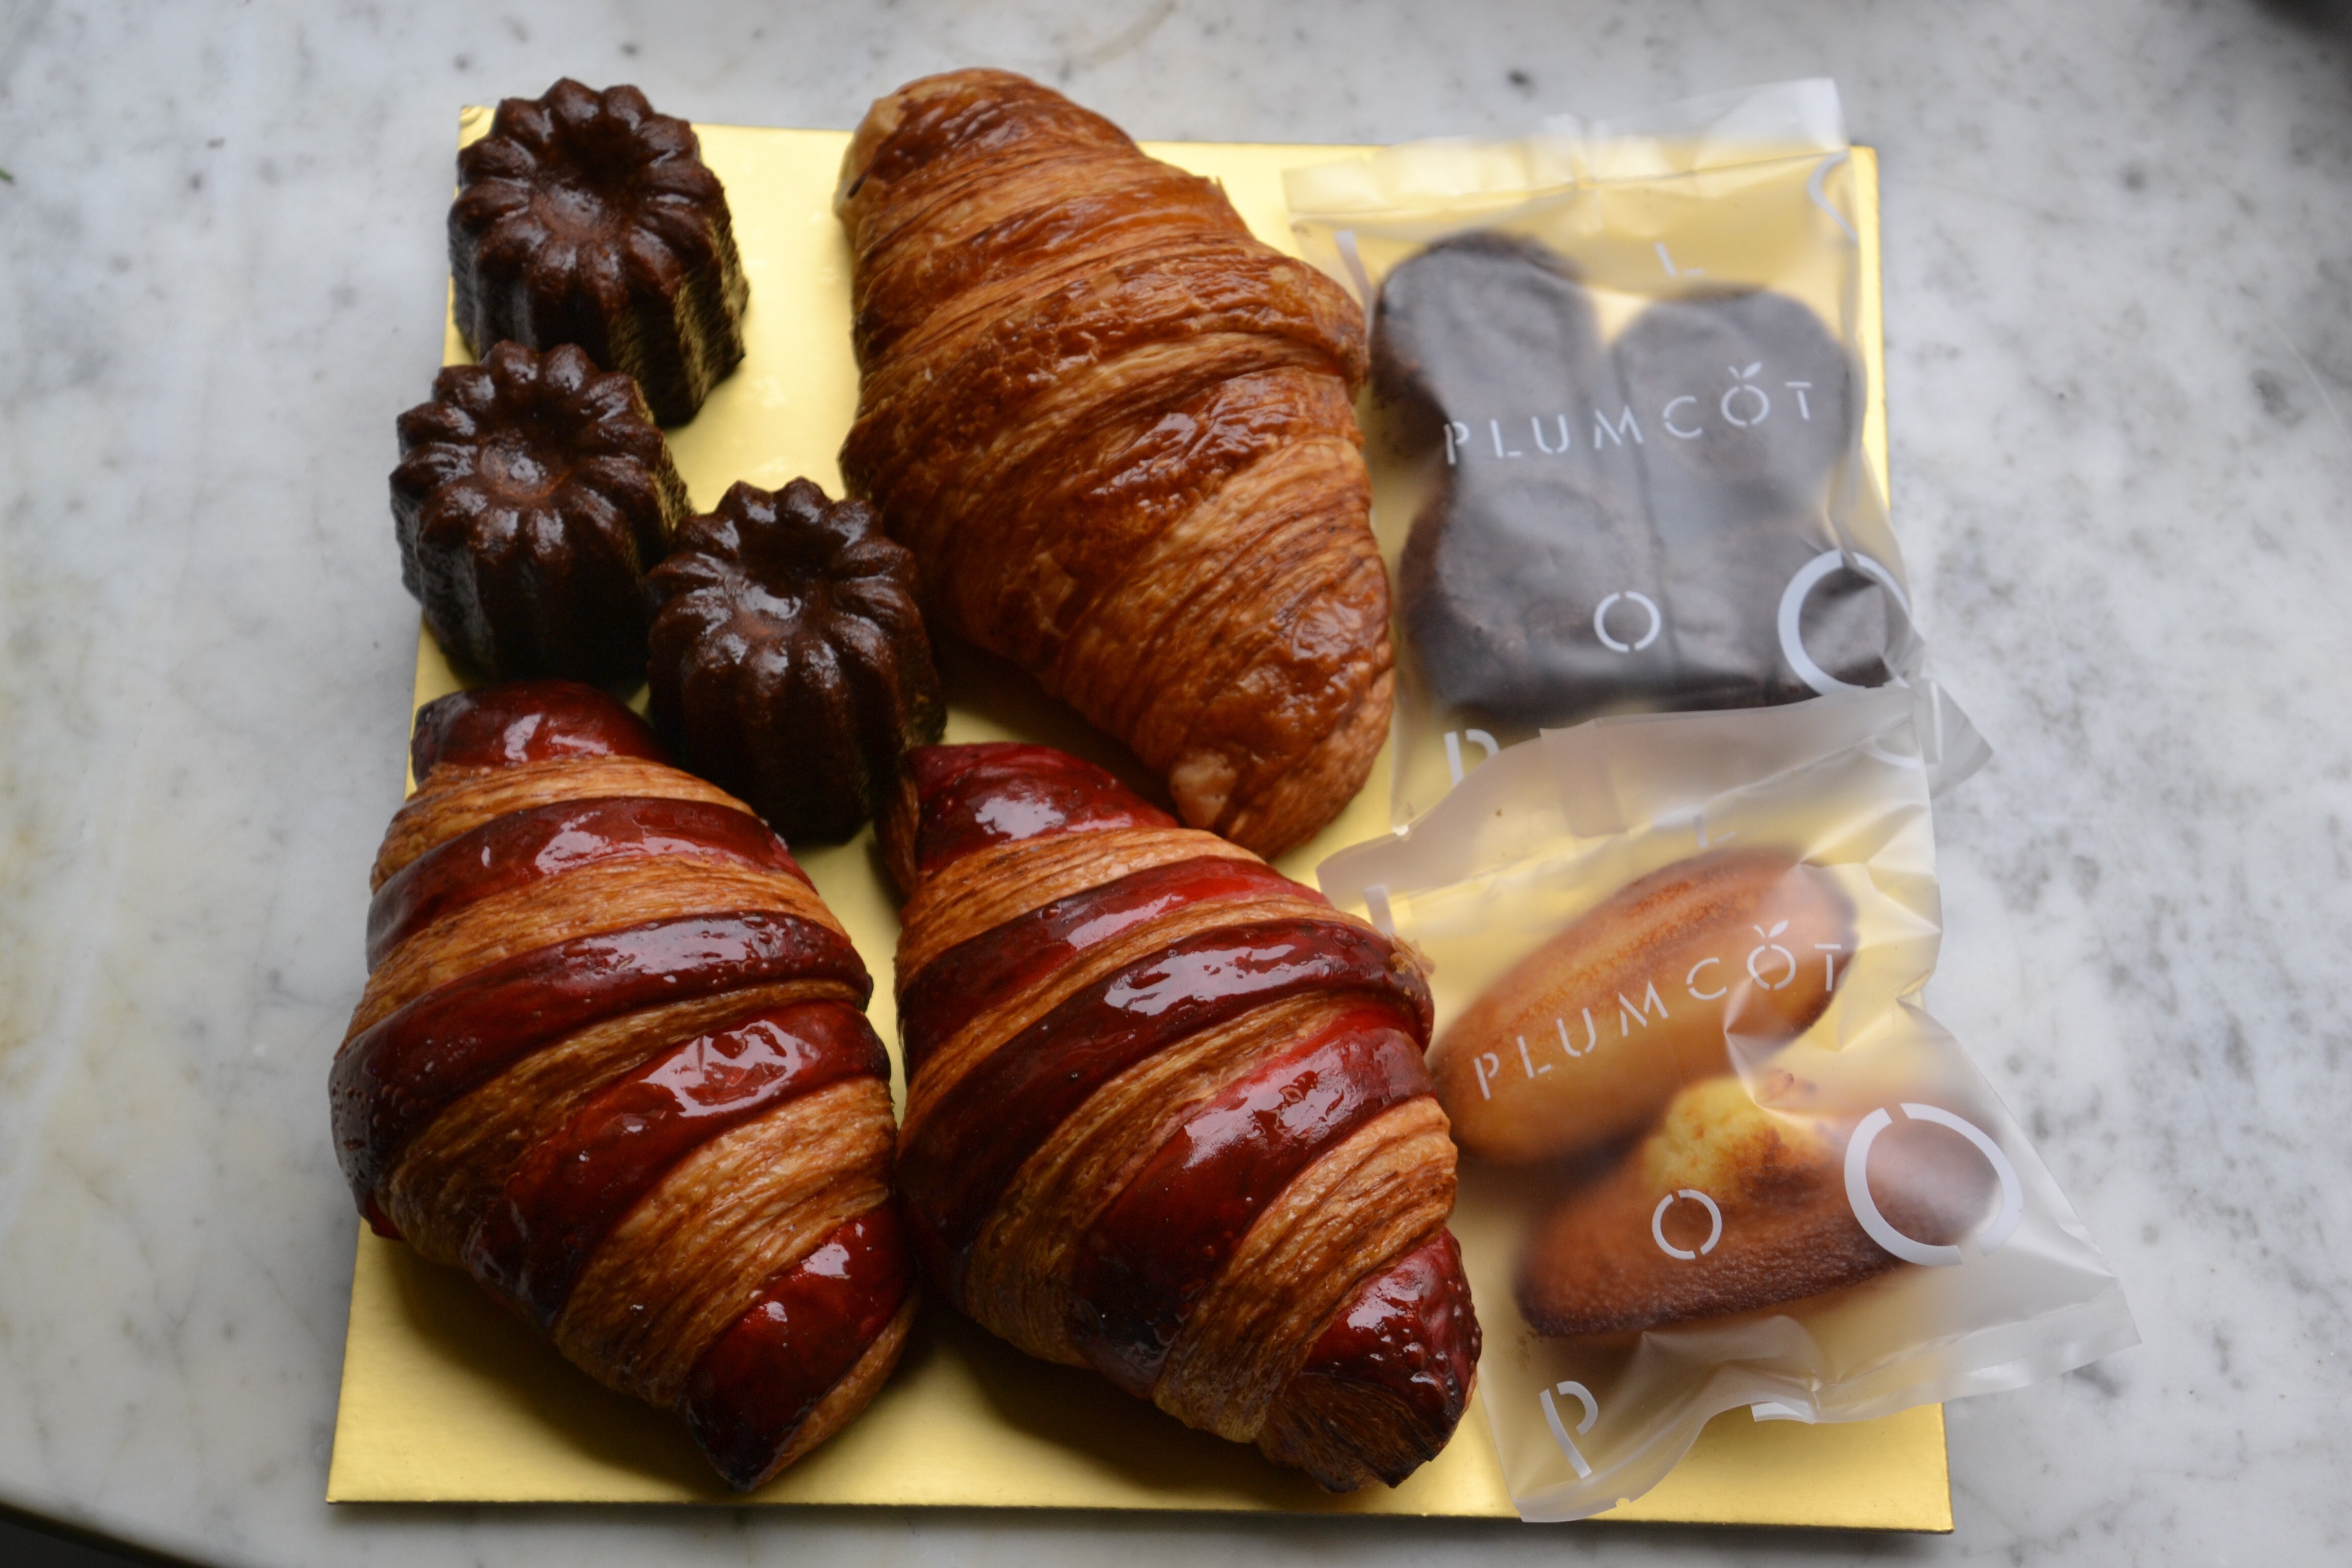 Selection of croissants and canelés at Plumcot. Photo: Chris Dwyer